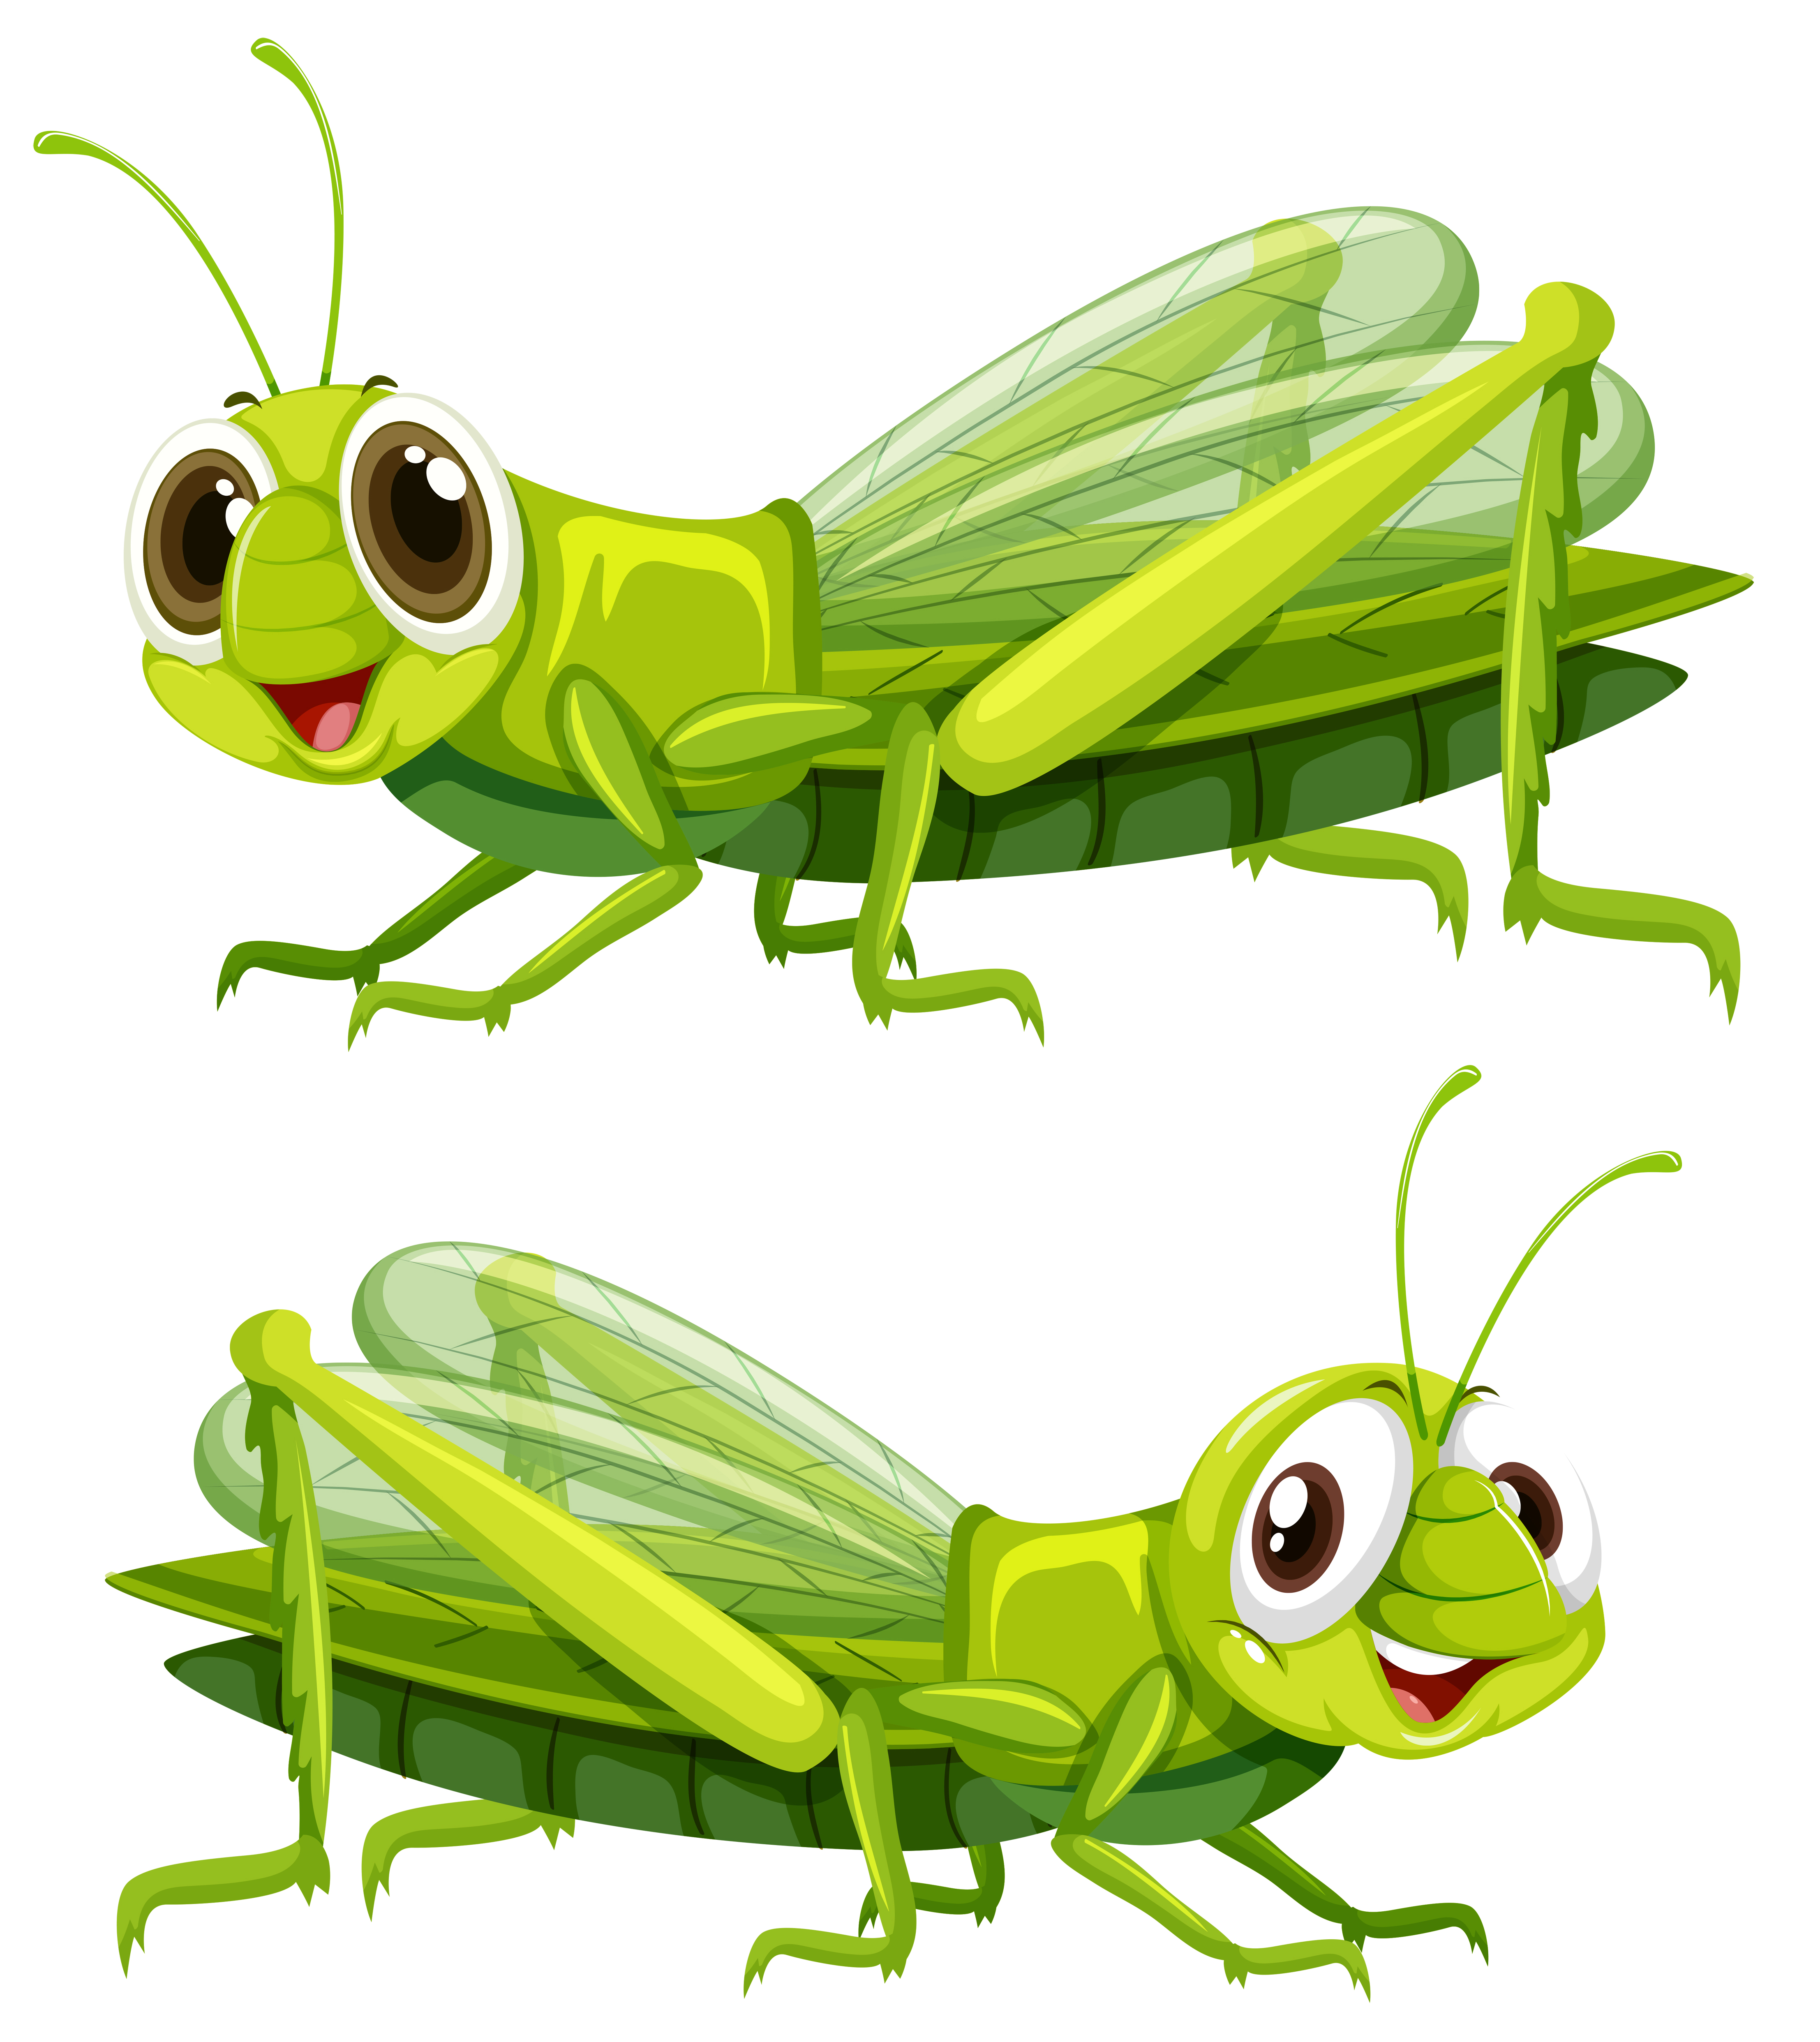 Grasshopper Vector Art, Icons, and Graphics for Free Download